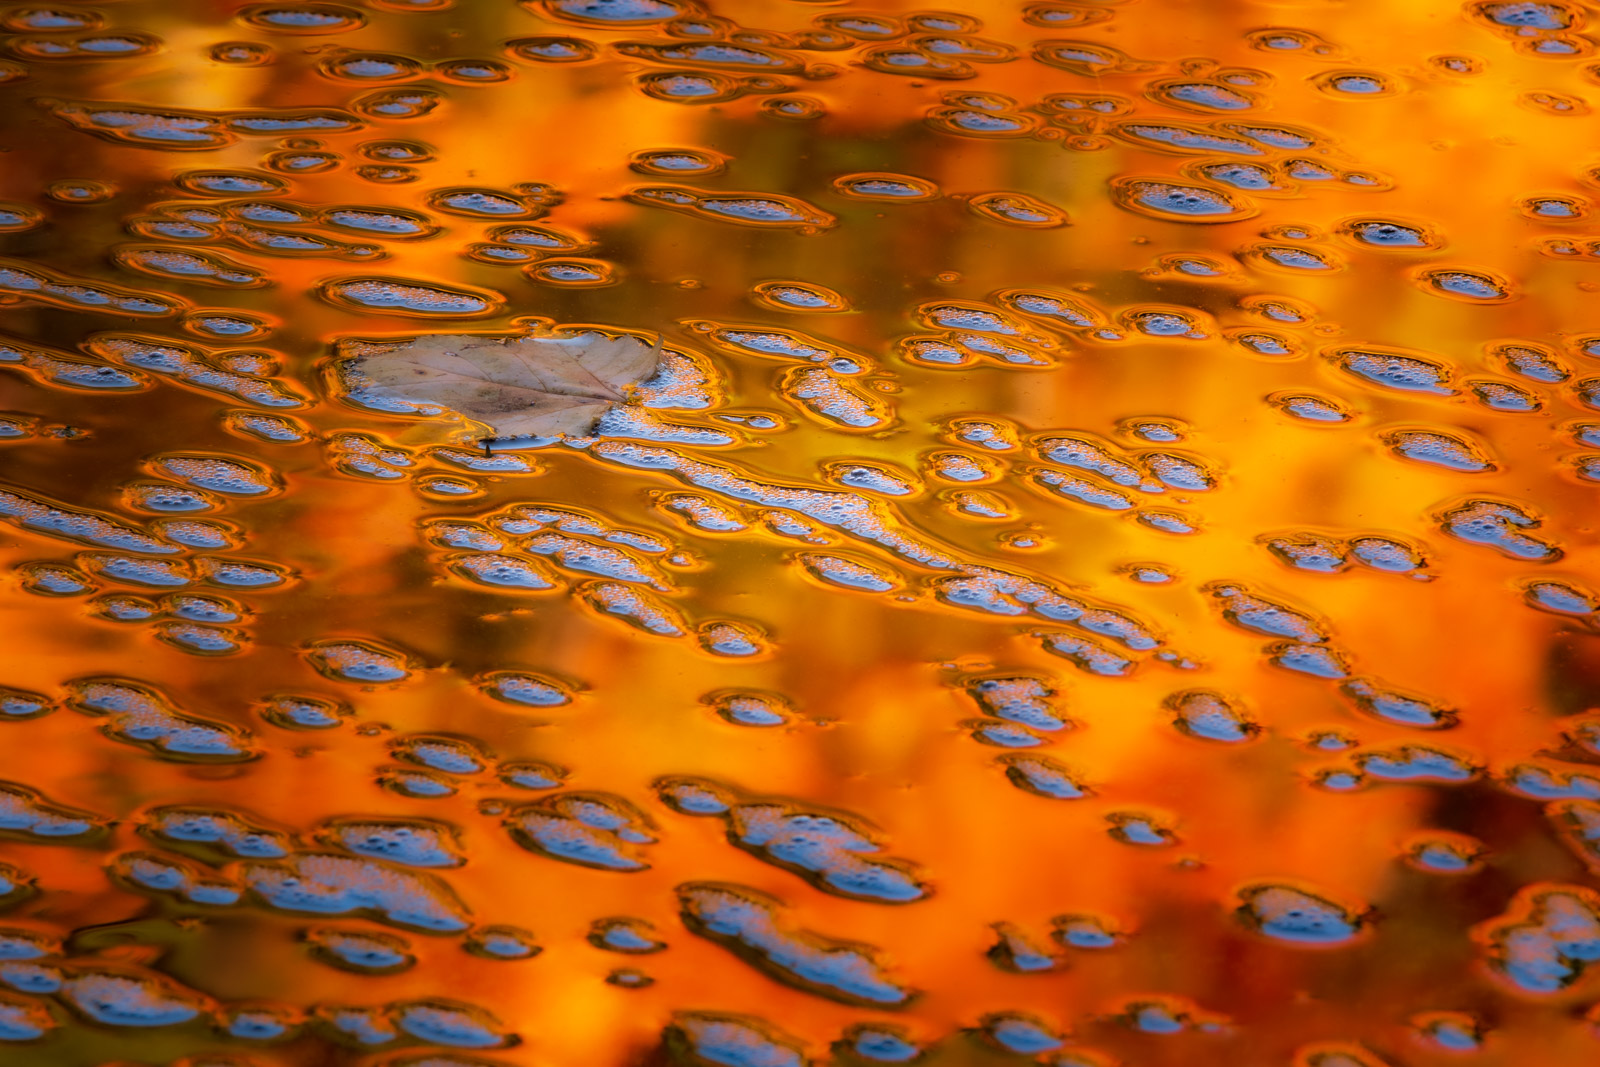 A single maple leaf surrounded by intense autumn reflections and bubbles on the Swift River.